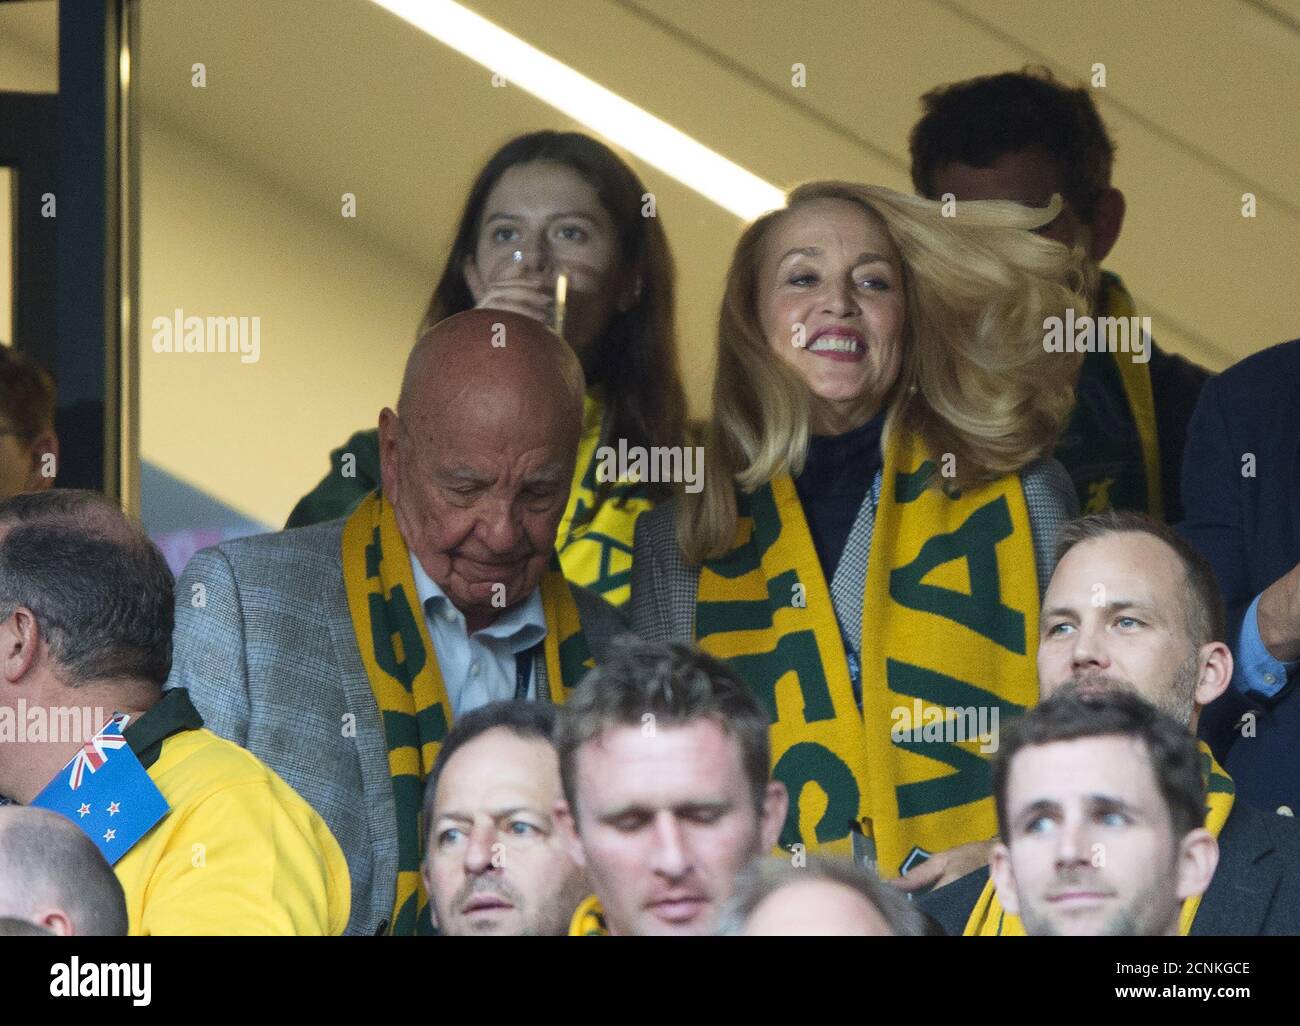 Jerry Hall and Rupert Murdoch in the crowd. New Zealand v Australia Rugby World Cup Final. Twickenham 31/10/2015.  PICTURE CREDIT : MARK PAIN / ALAMY Stock Photo